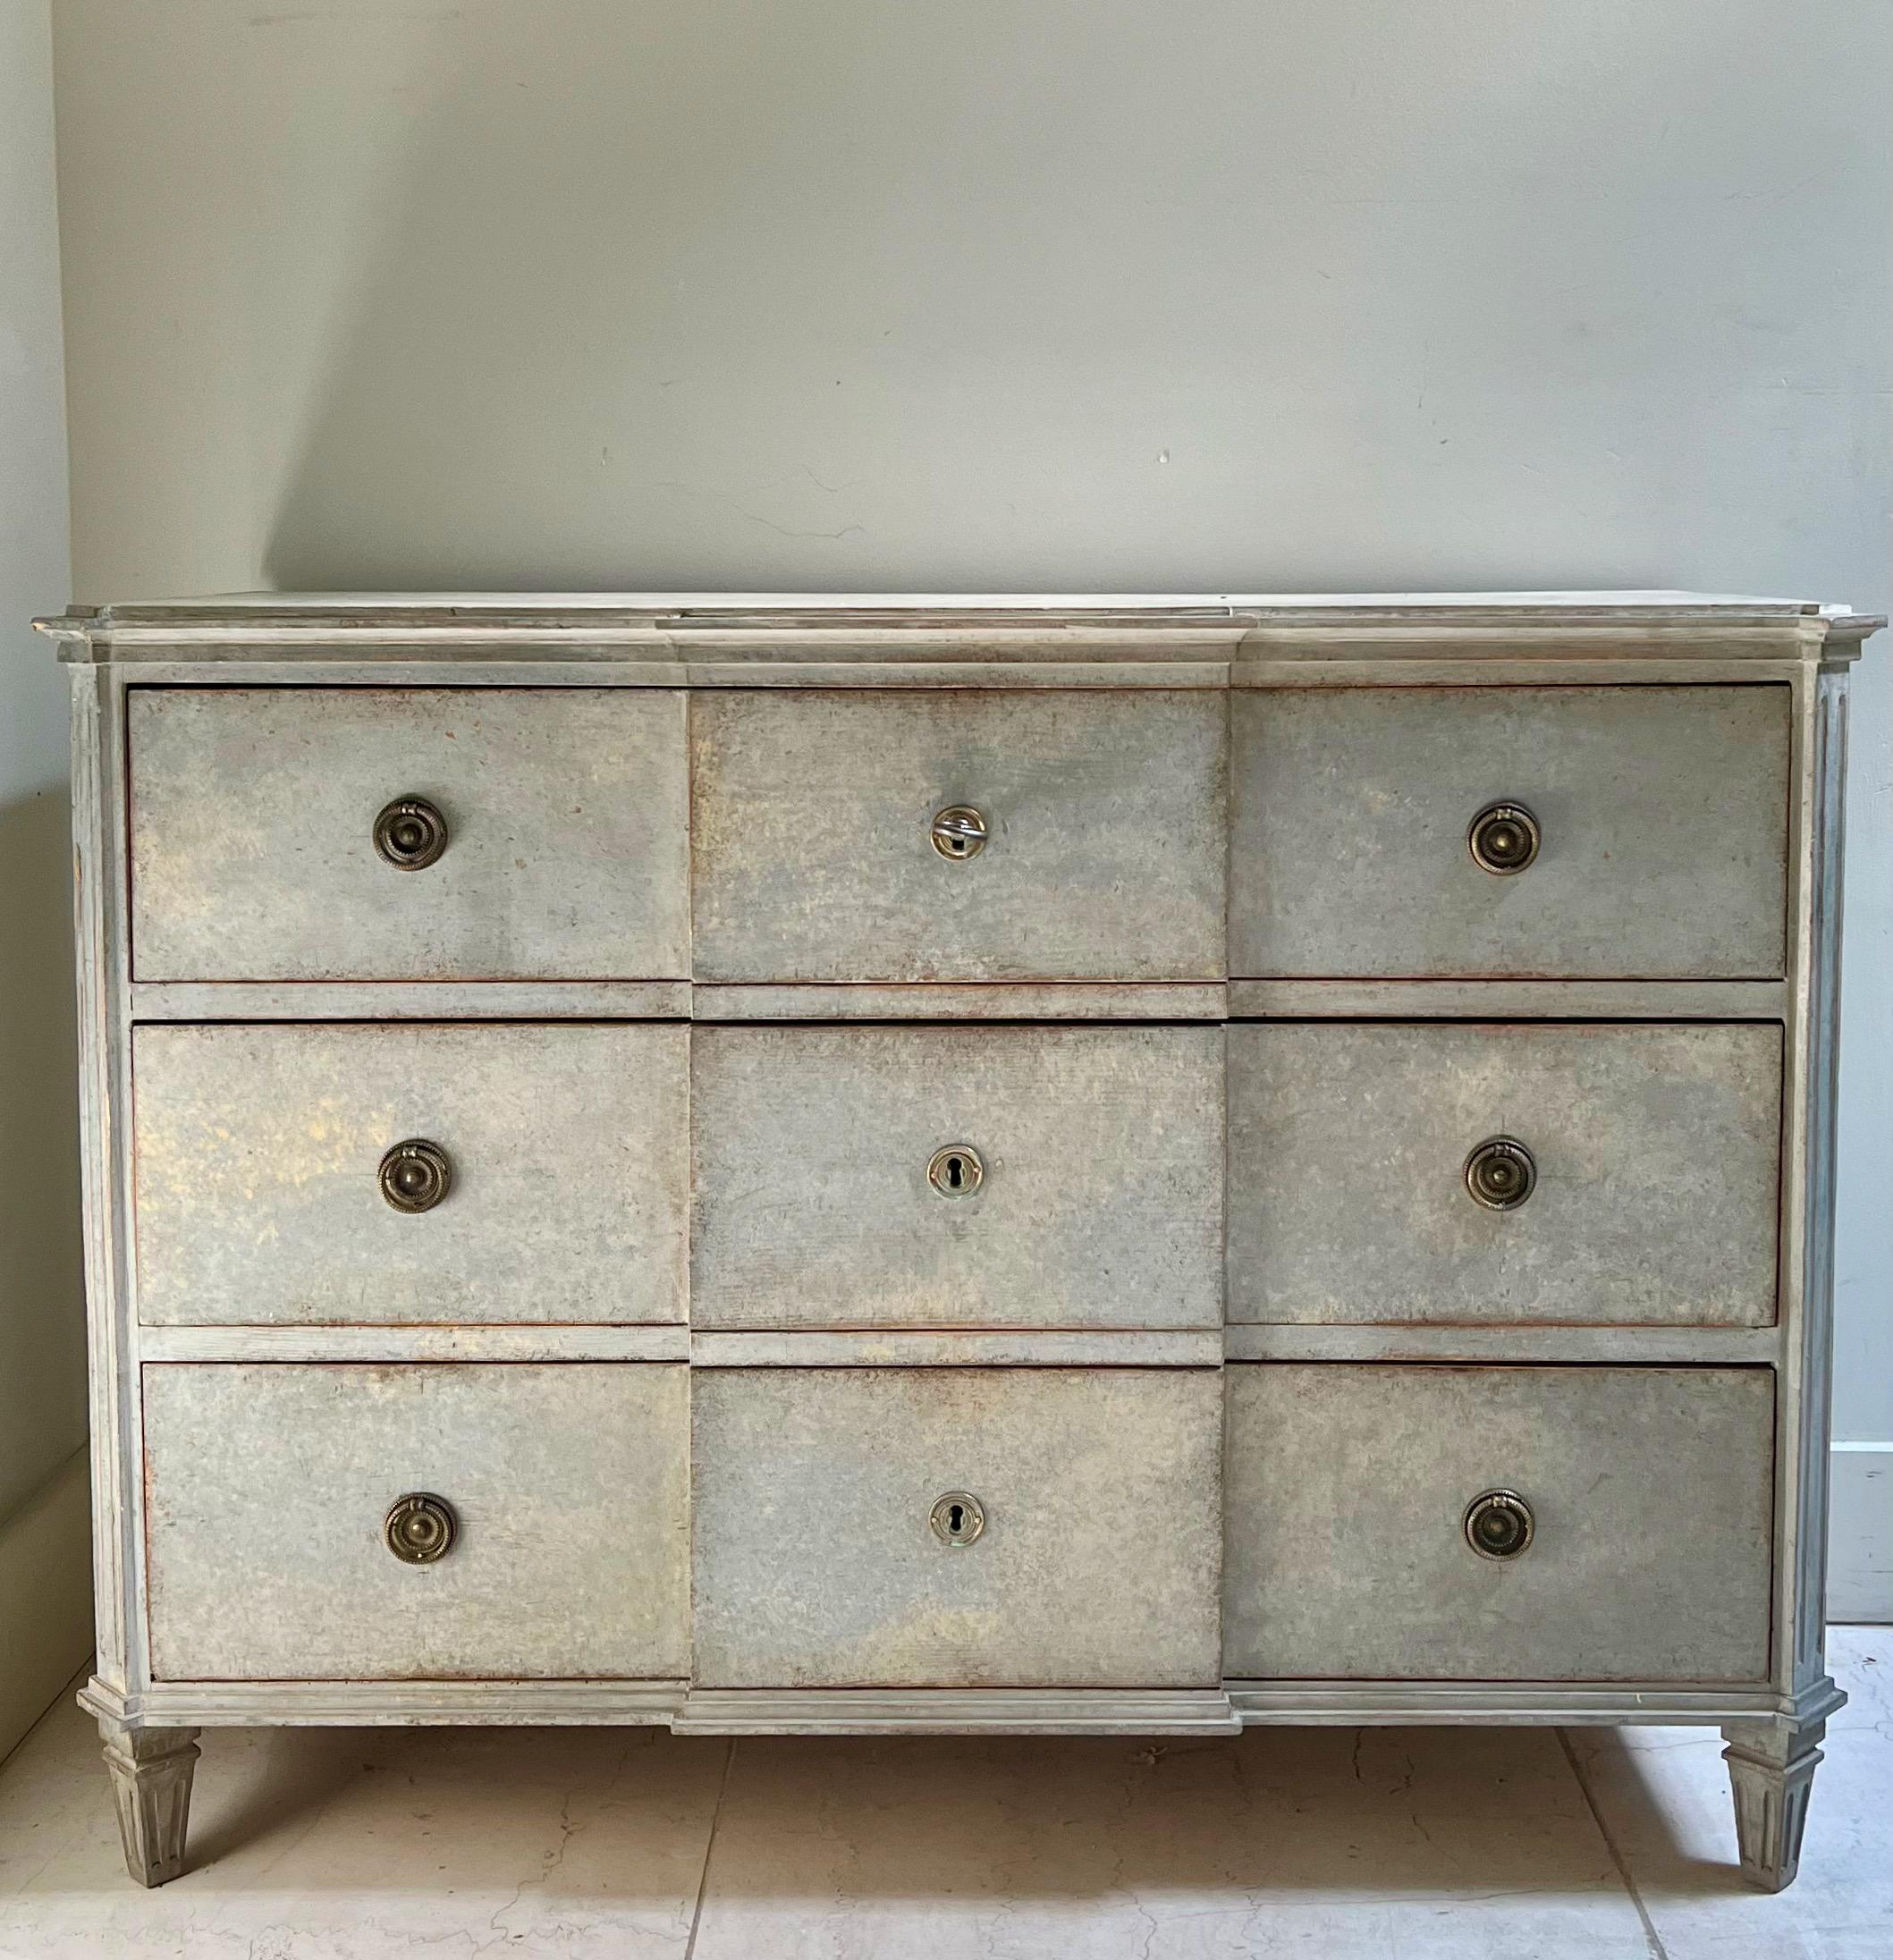 A handsome, large Swedish Gustavian period chest of drawers in wonderful later painted light blue. Canted corners, marbleized wooden shaped top on tapered short feet.
Stockholm, Sweden, 1800-1810.
 
 